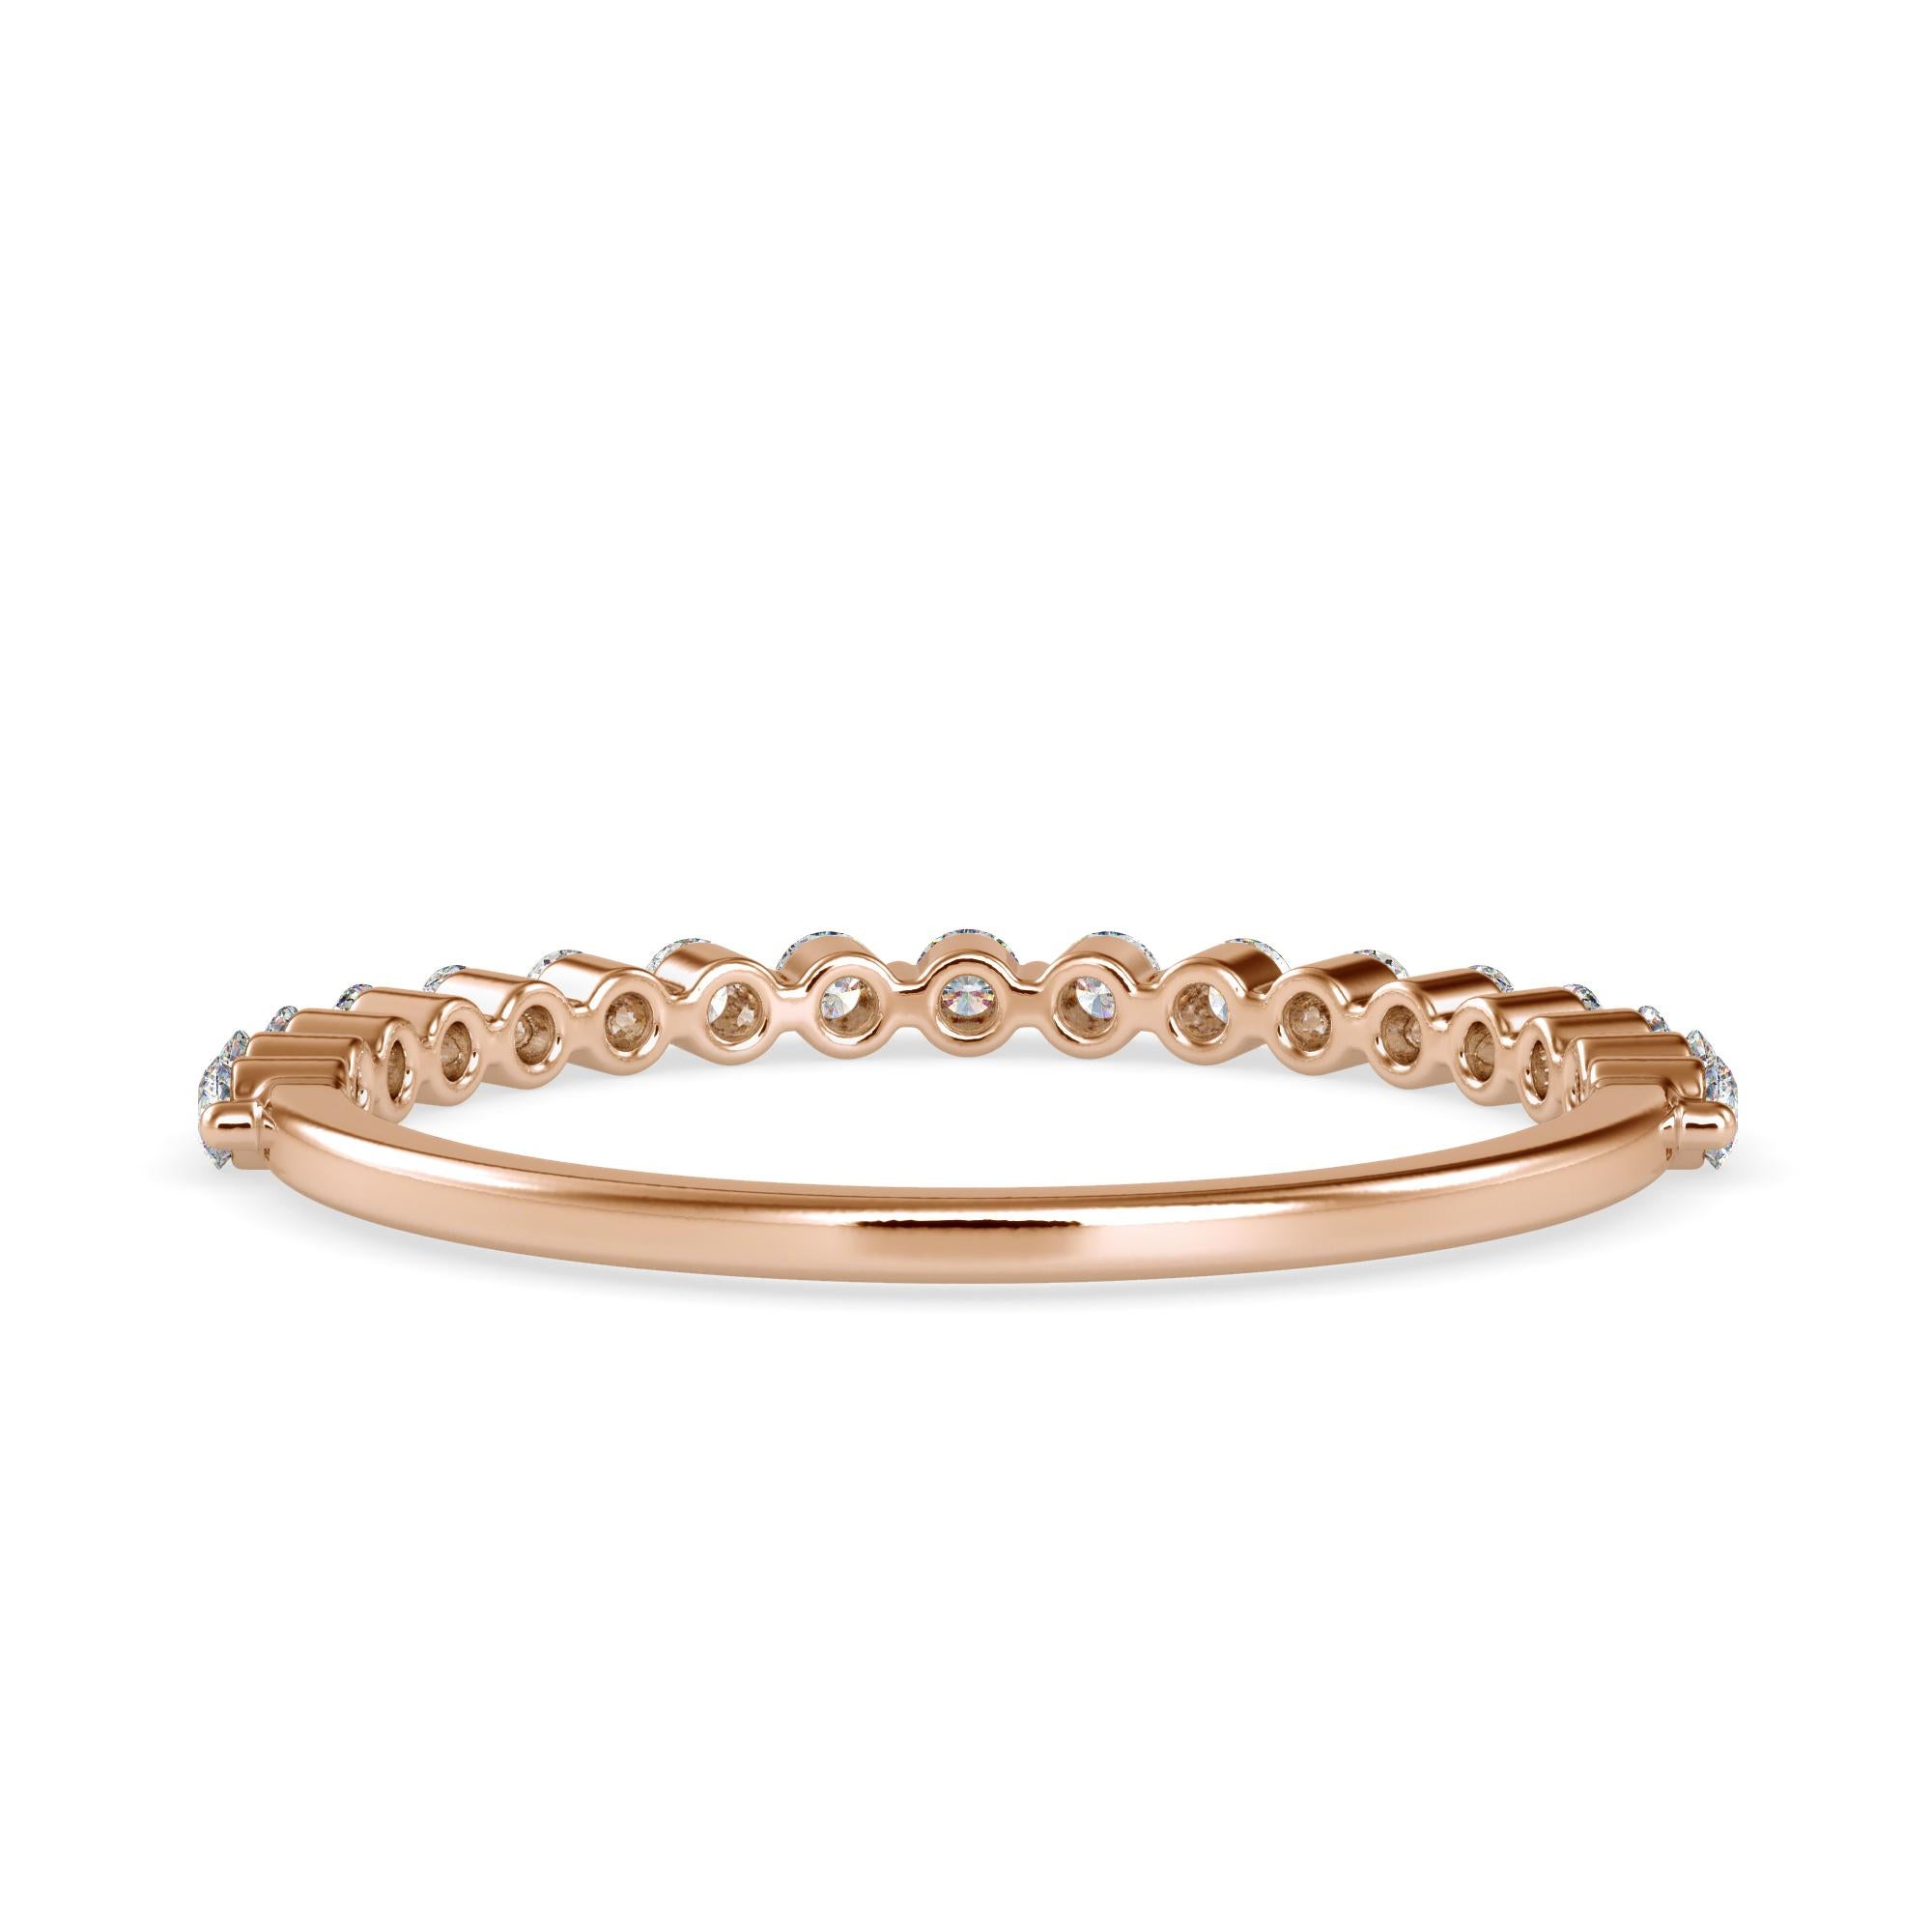 0.26 Carat Diamond 14K Rose Gold Ring
Stamped: 14K 
Total Ring Weight: 1.3 Grams
Diamond Weight: 0.26 Carat (F-G Color, VS2-SI1 Clarity) 1.6 Millimeters 
Diamond Quantity: 17 
SKU: [500028]